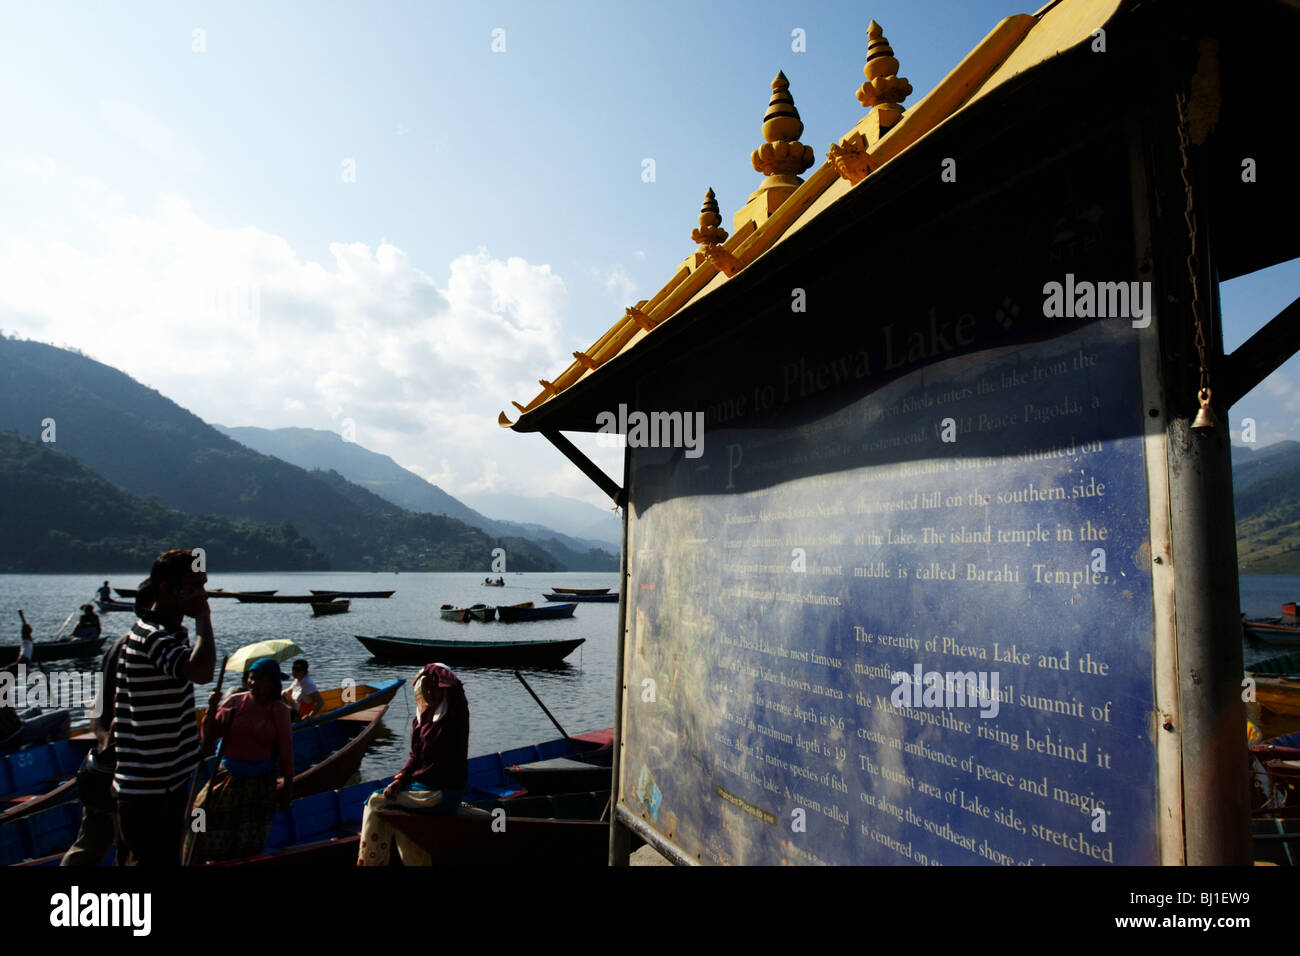 Signboard on the side of Pewha Lake in Pokhara, Nepal on Monday October 26, 2009. Stock Photo